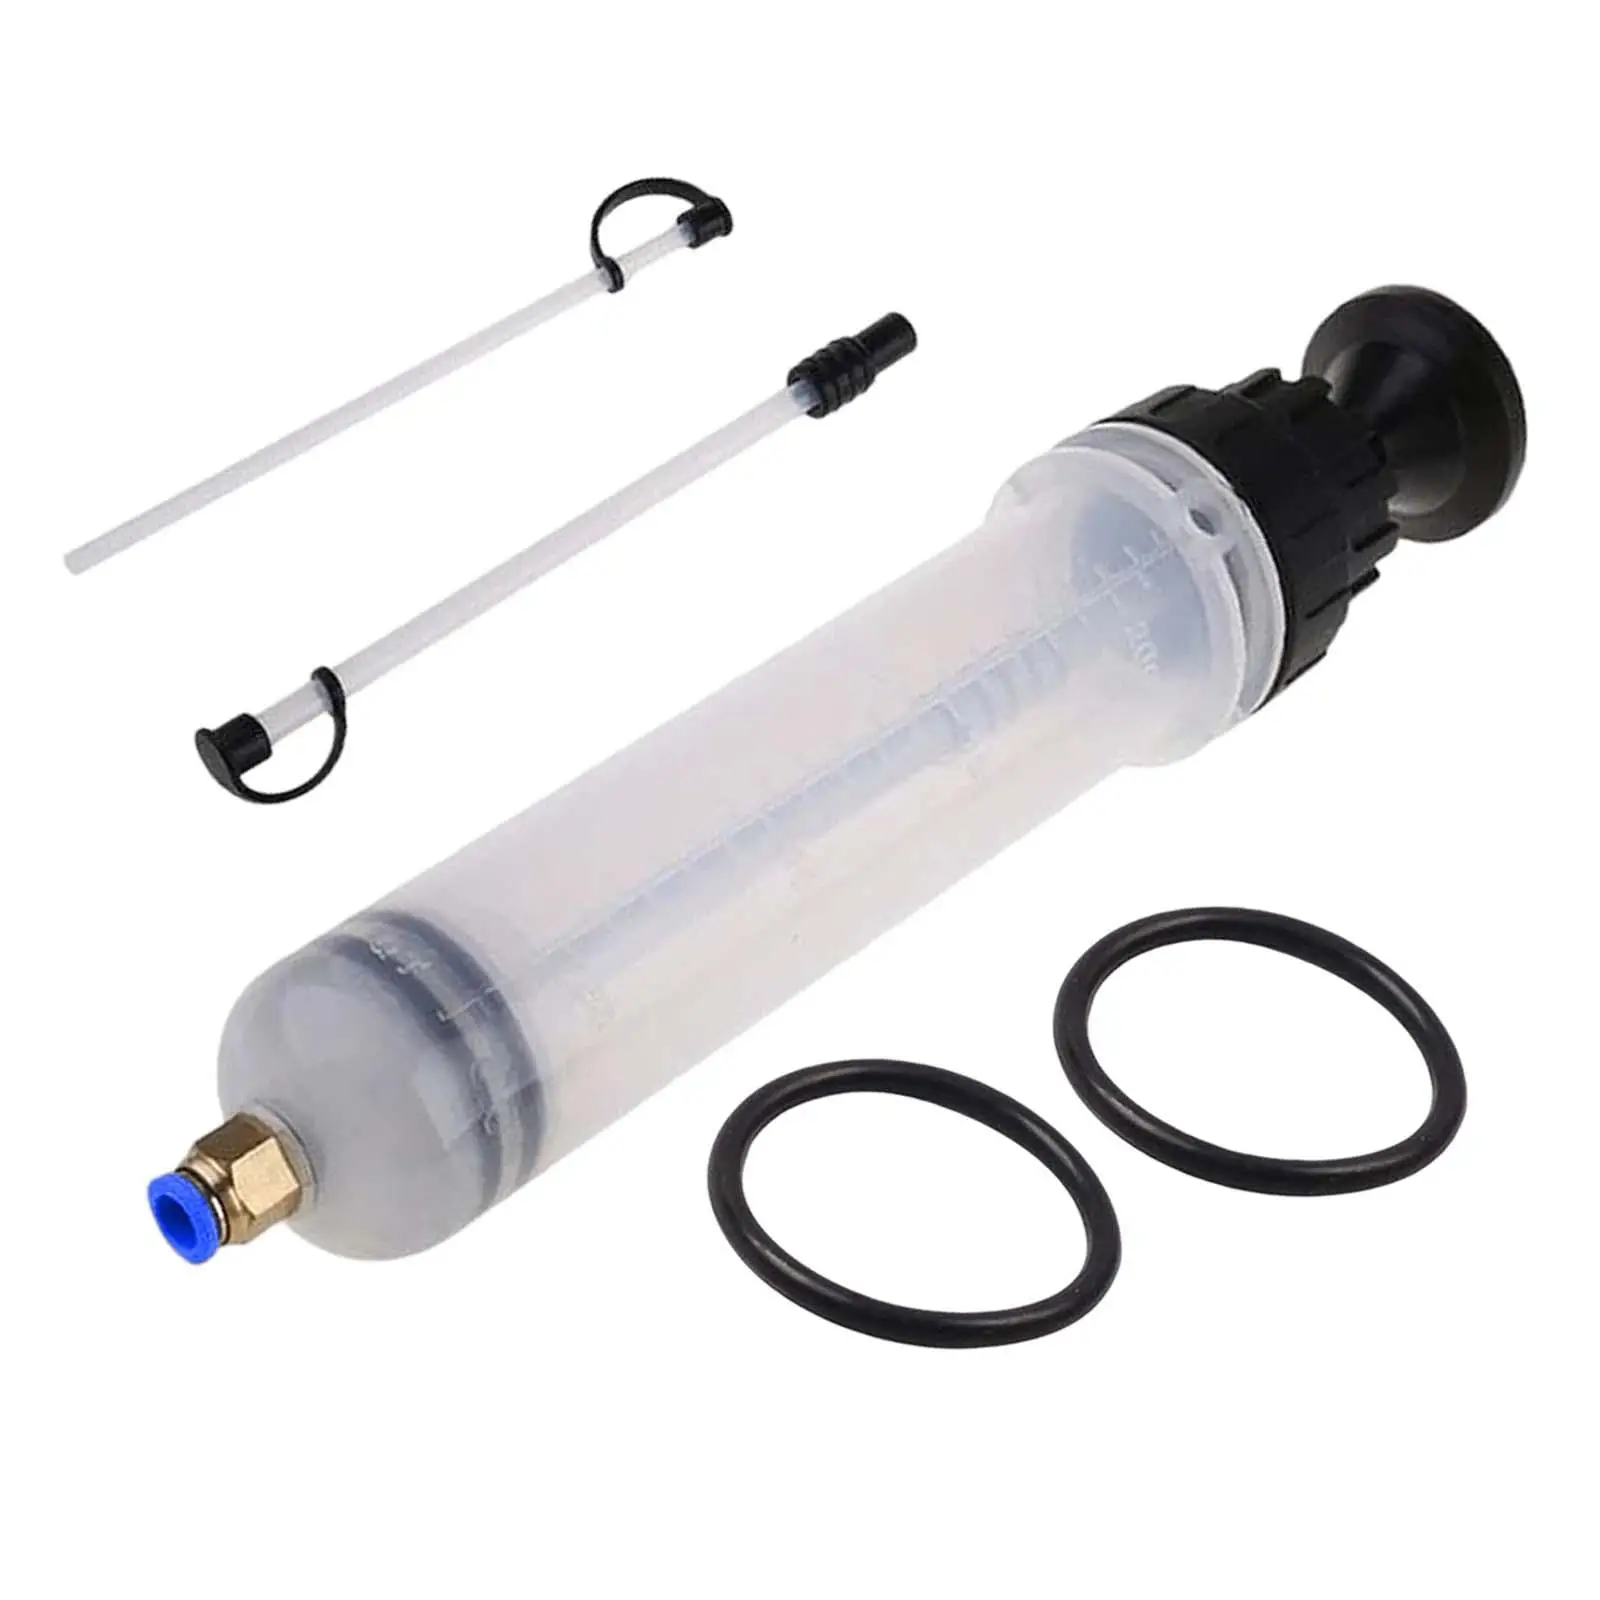 Car Brake Fluid Extractor Filling Transfer Liquid Pump Replacement Tool Fluid Extraction 500cc Universal for Car Motorcycle